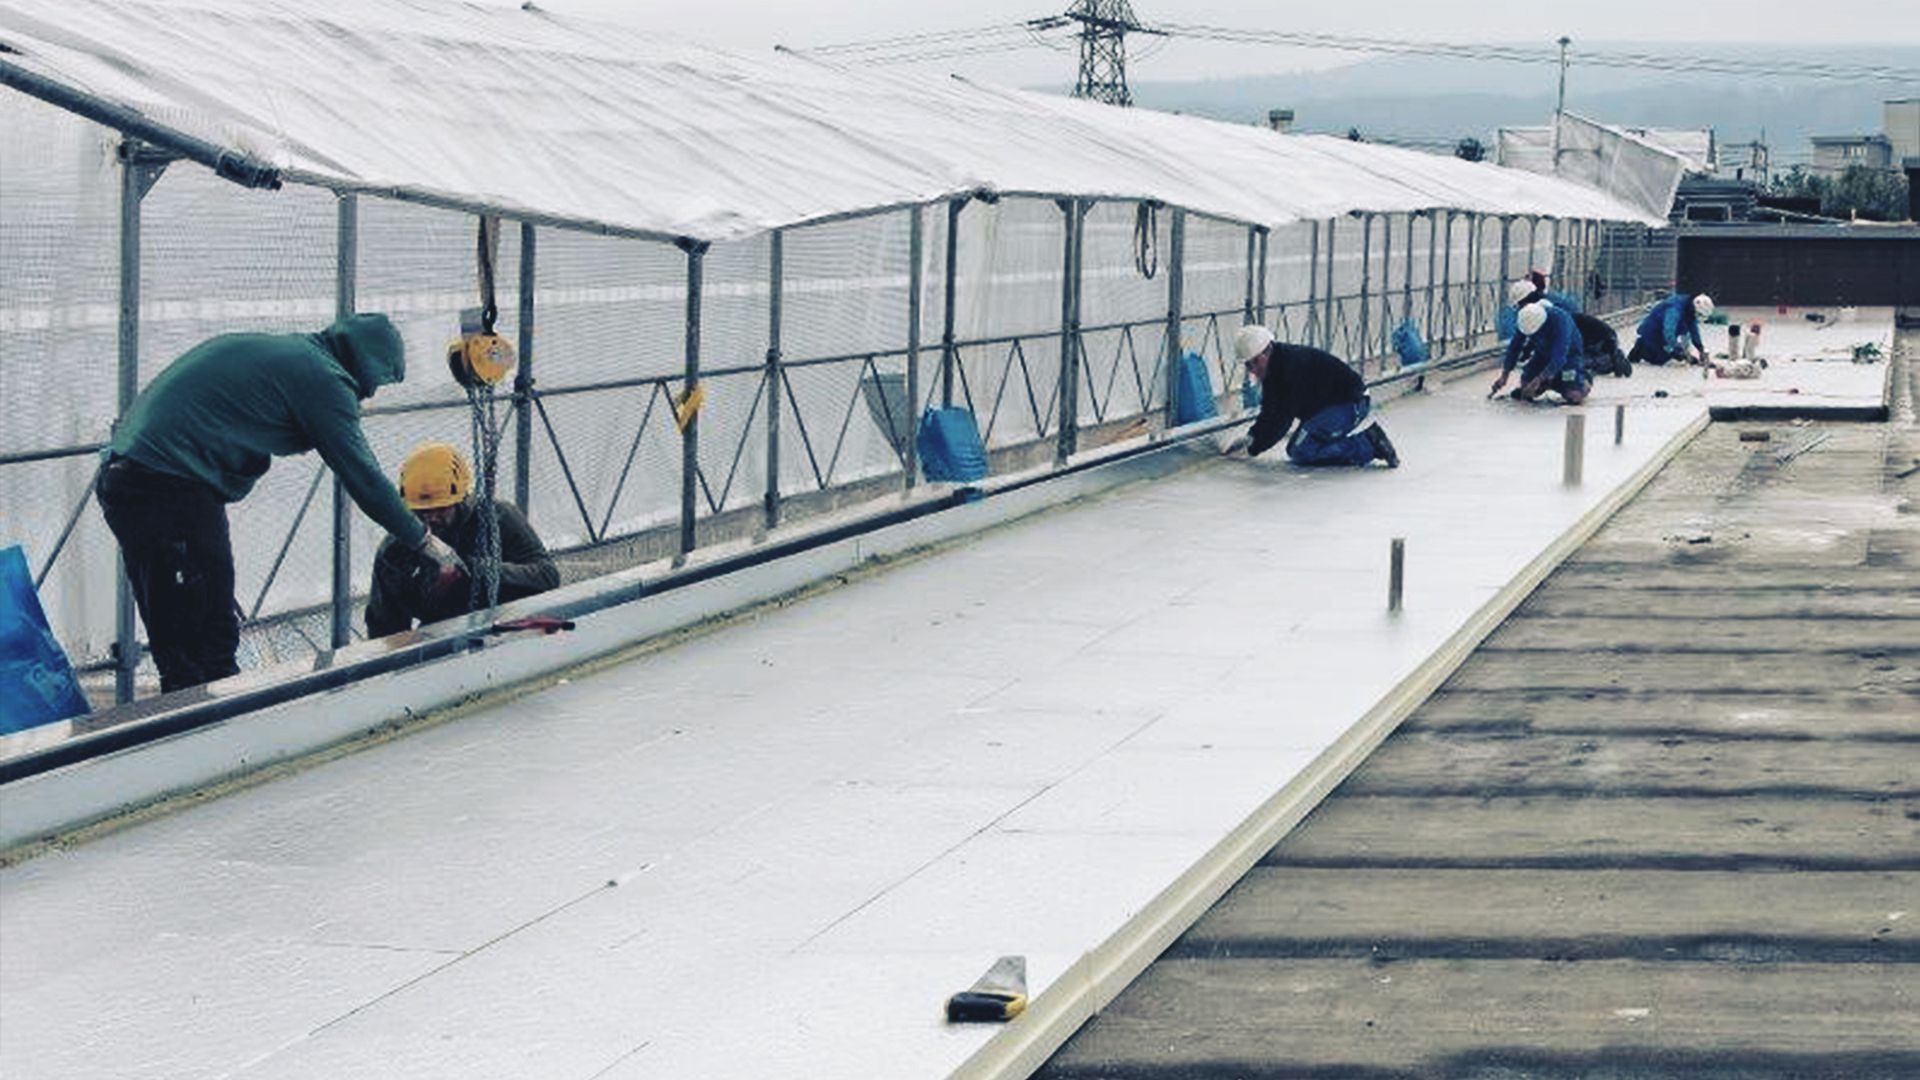 Men at work on a roof top